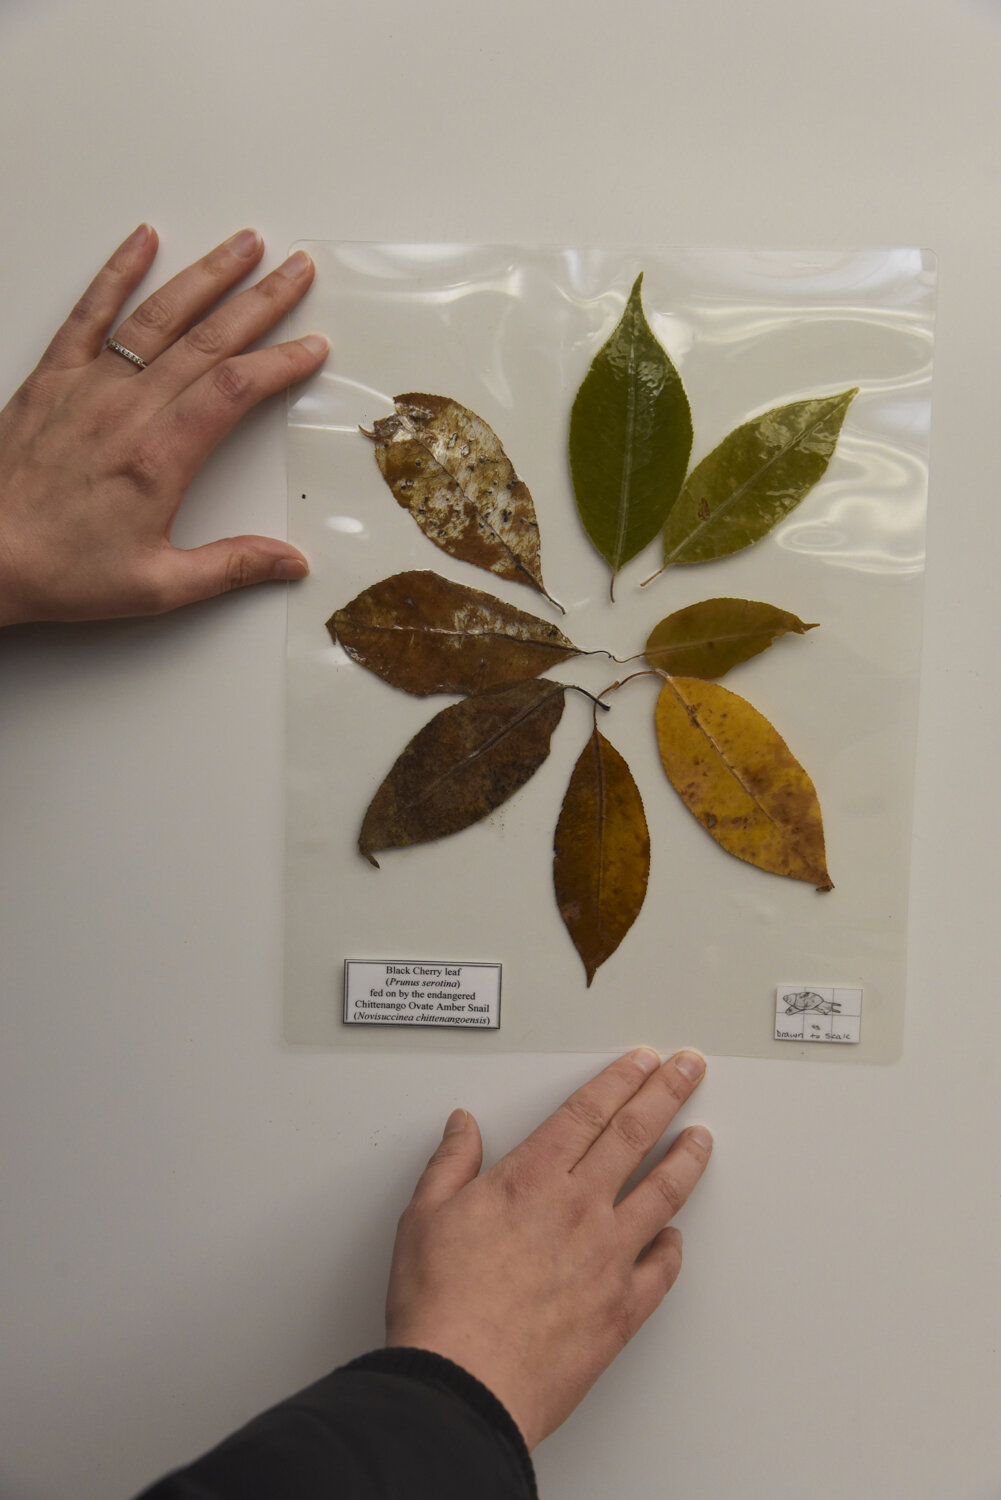  Cody Gilbertson holds up a diagram of black cherry leaves at different stages of decomposition. Several of the leaves have been partially eaten by Chittenango snails.  